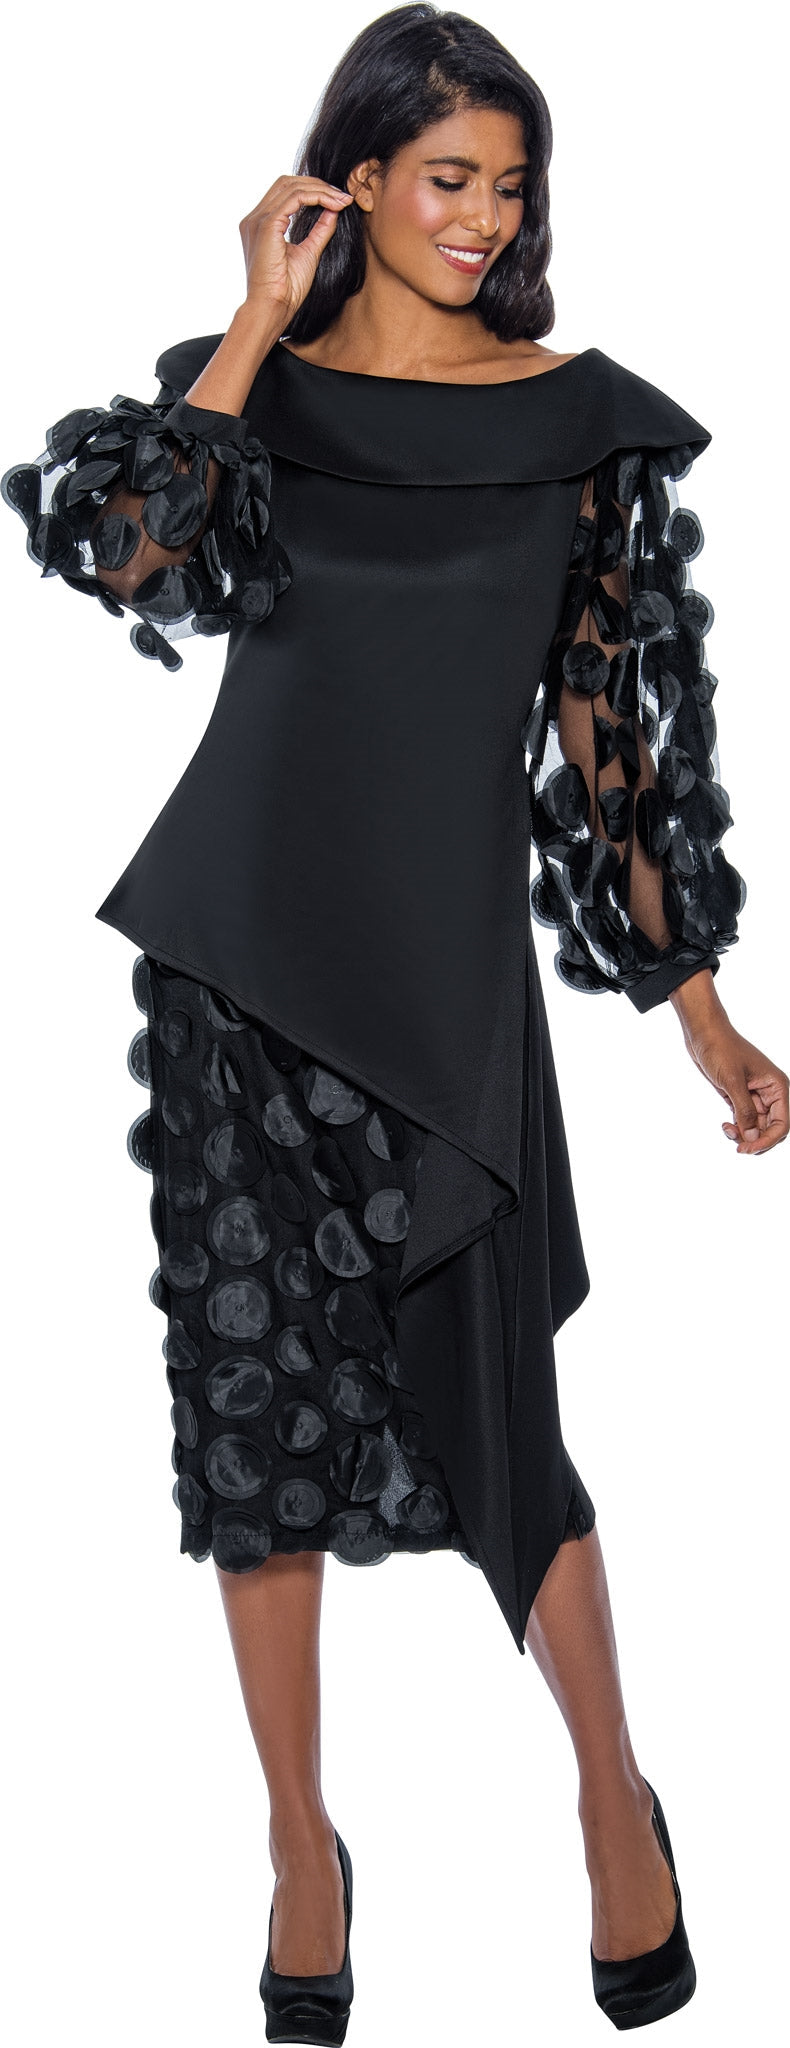 Stellar Looks Skirt Suit 1642-Black - Church Suits For Less